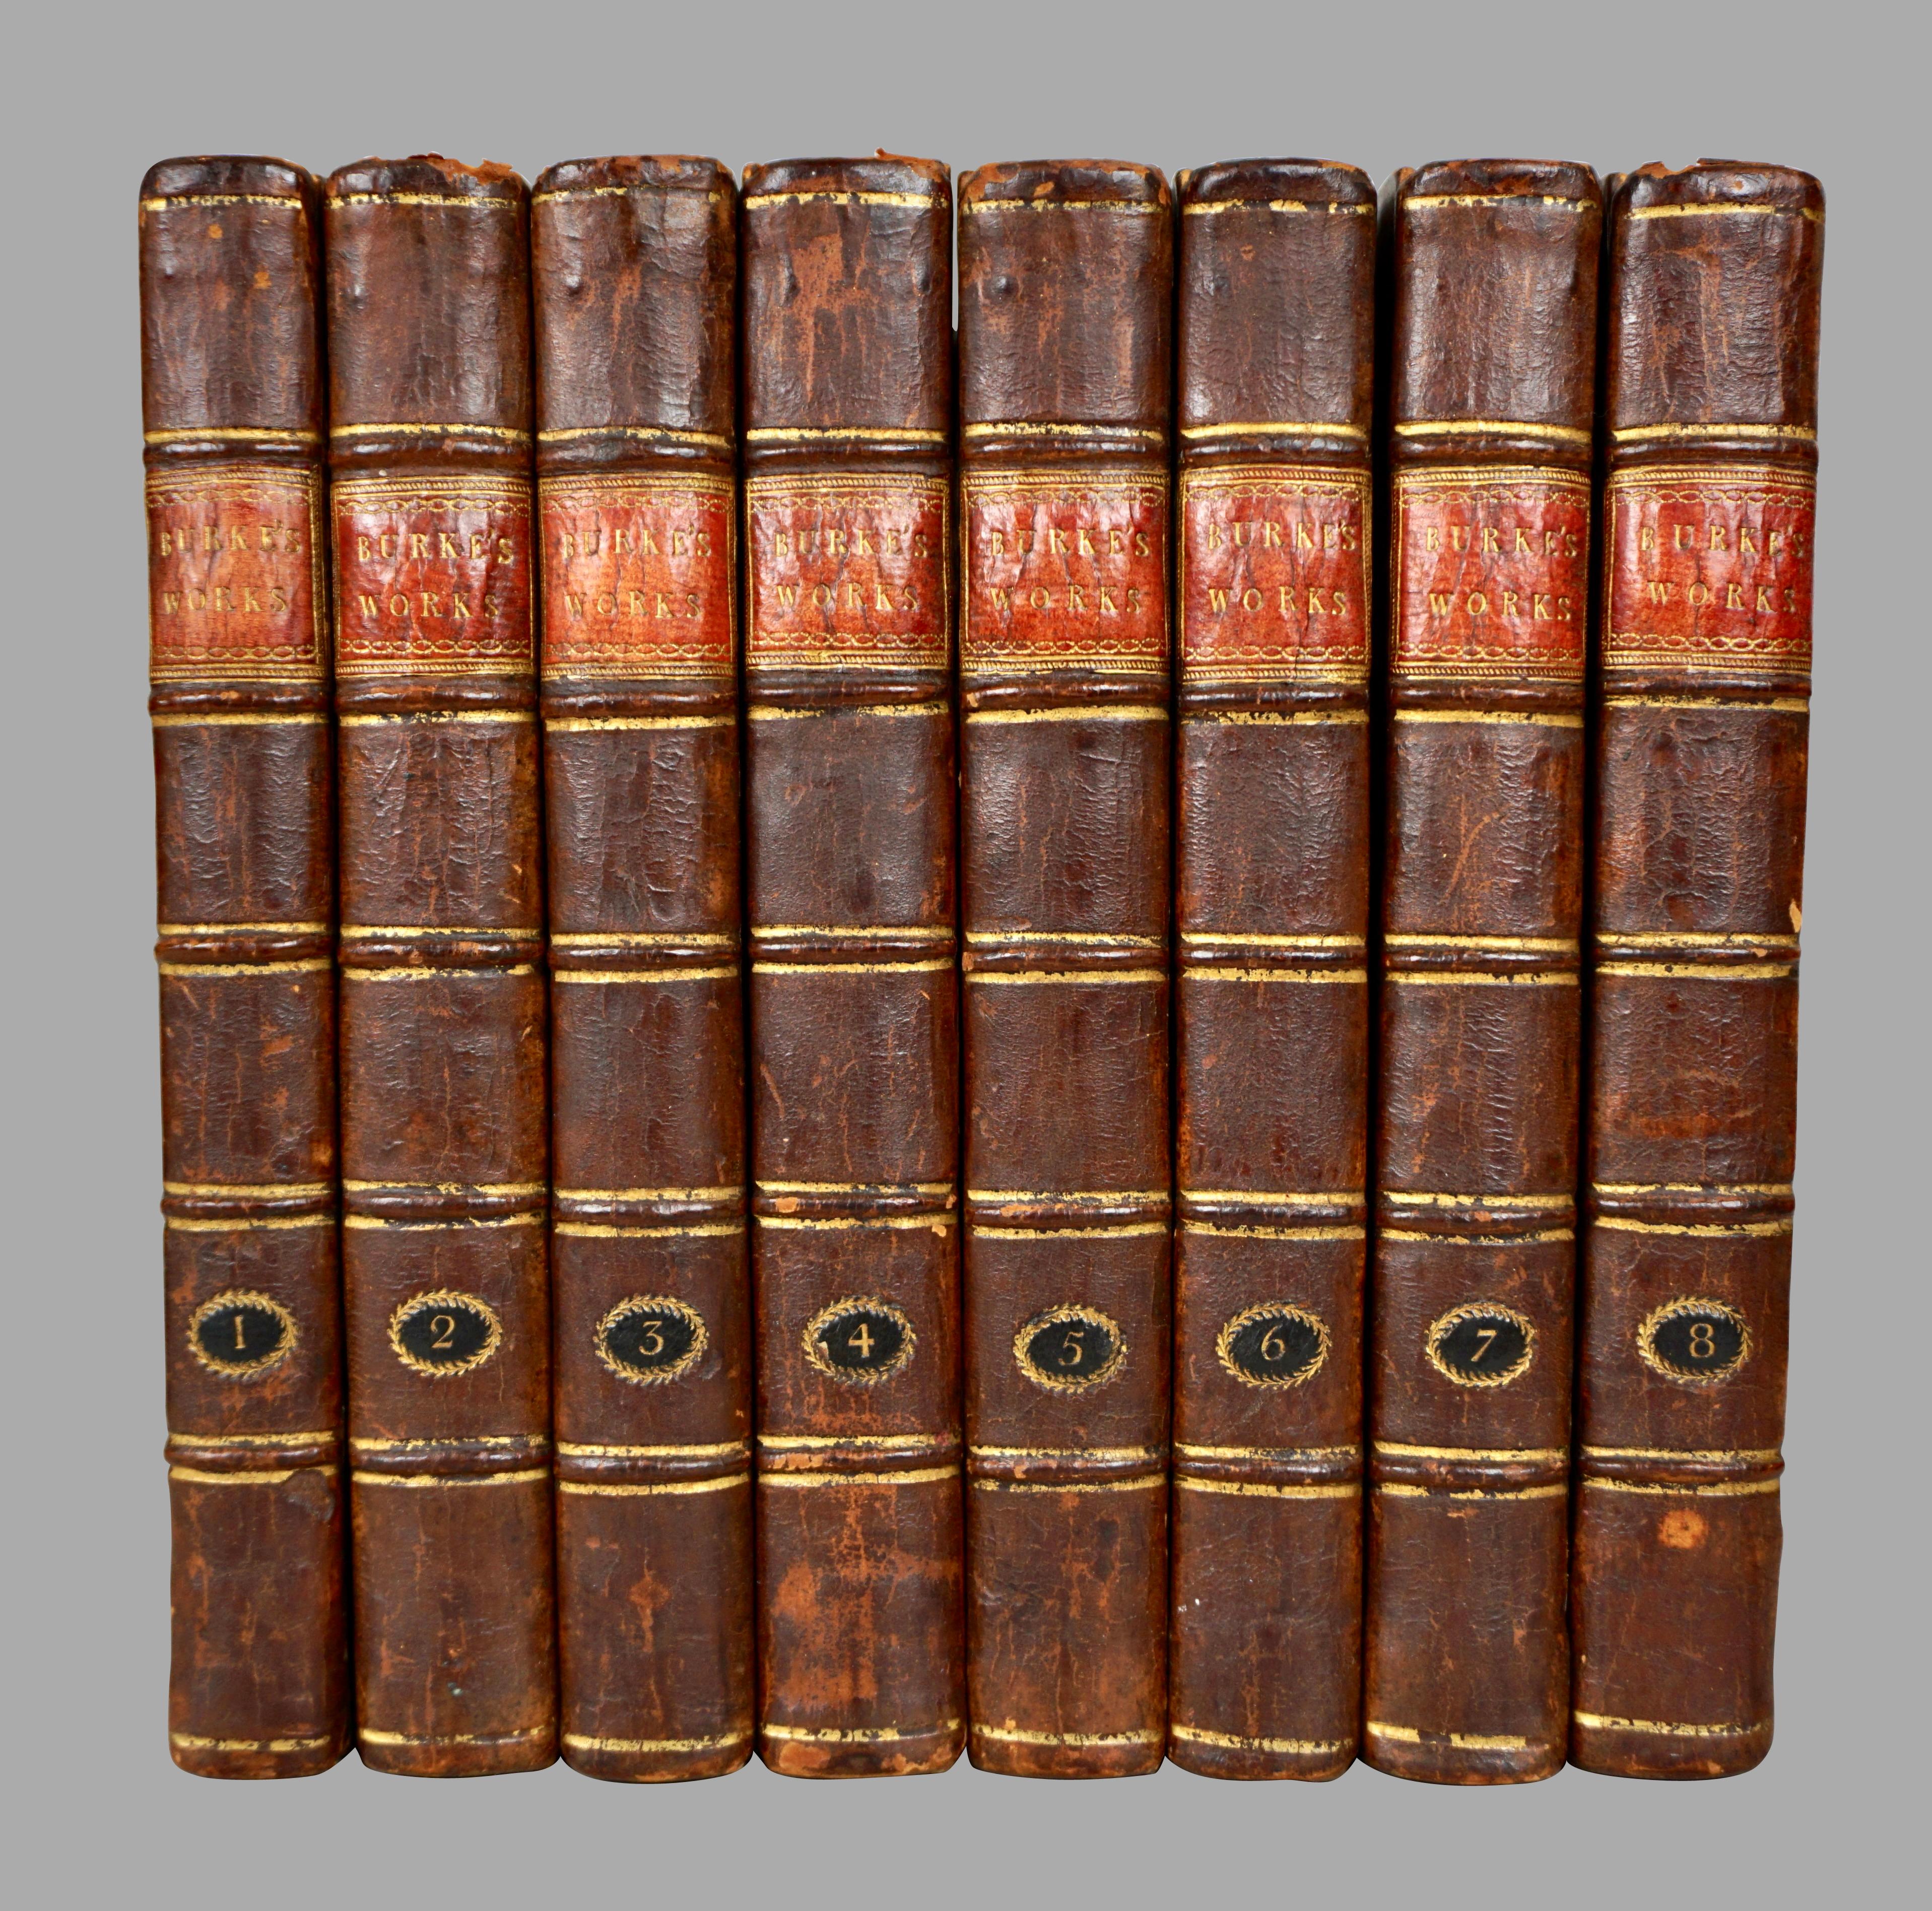 The Works of the Right Honorable Edmund Burke in 8 volumes published for F.C. and J. Rivington, St. Paul's Yard, England by Luke Hanfard and Sons, near Lincoln's-Inn Fields. Cet ensemble attrayant de 8 volumes est relié en plein cuir avec des dos